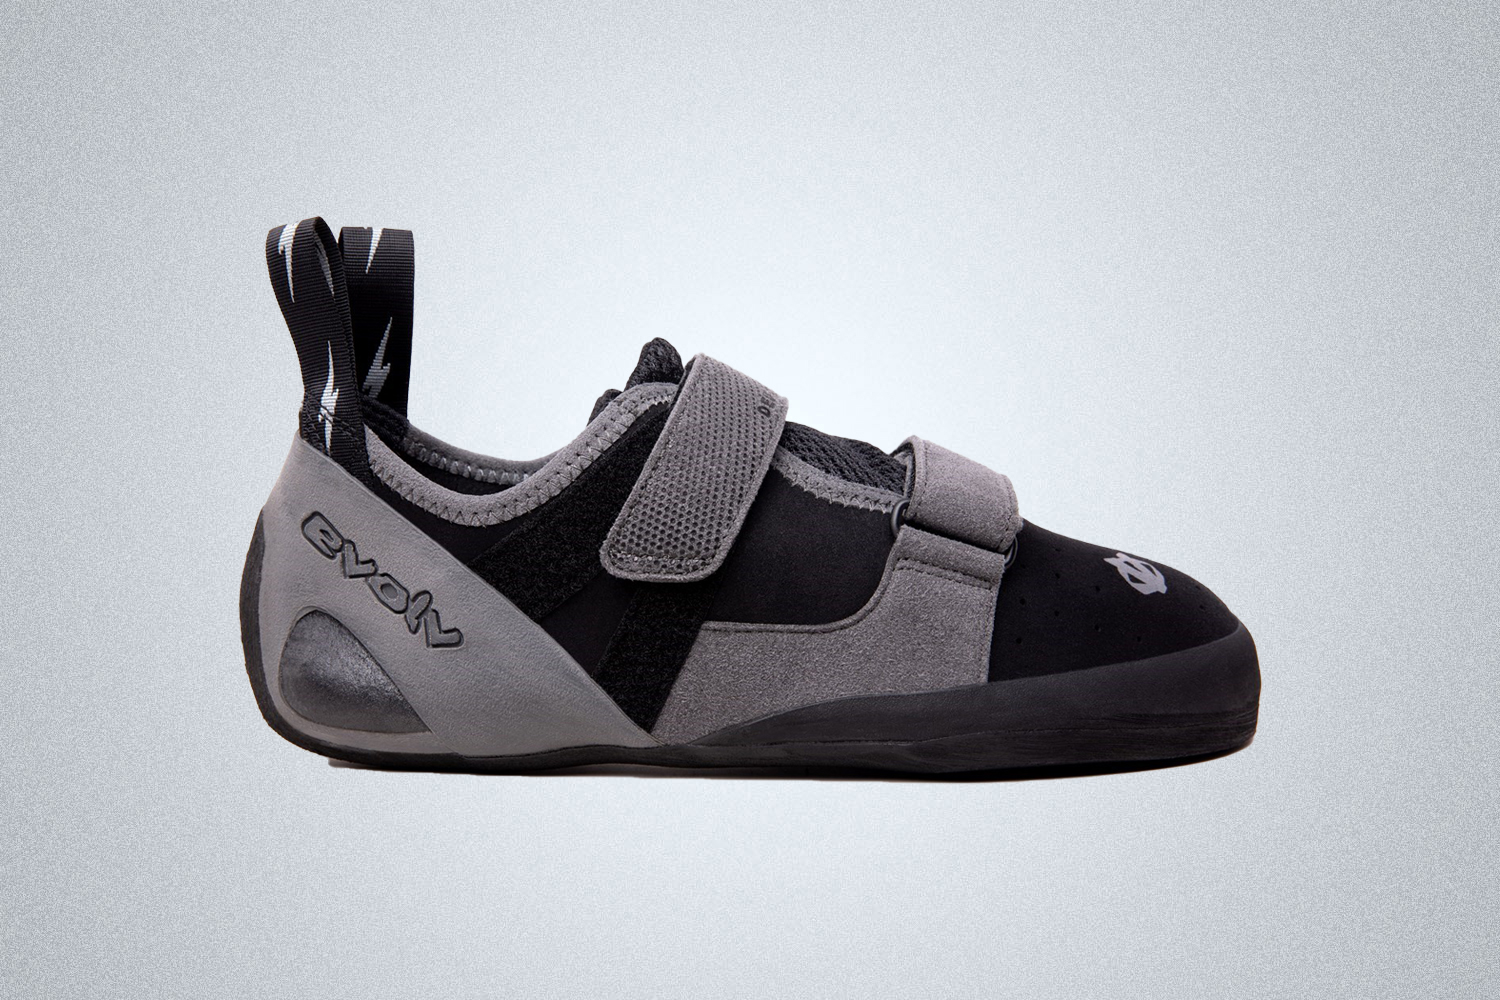 The Evolv Defy Climbing Shoe is one of the best climbing shoes for beginners in 2022